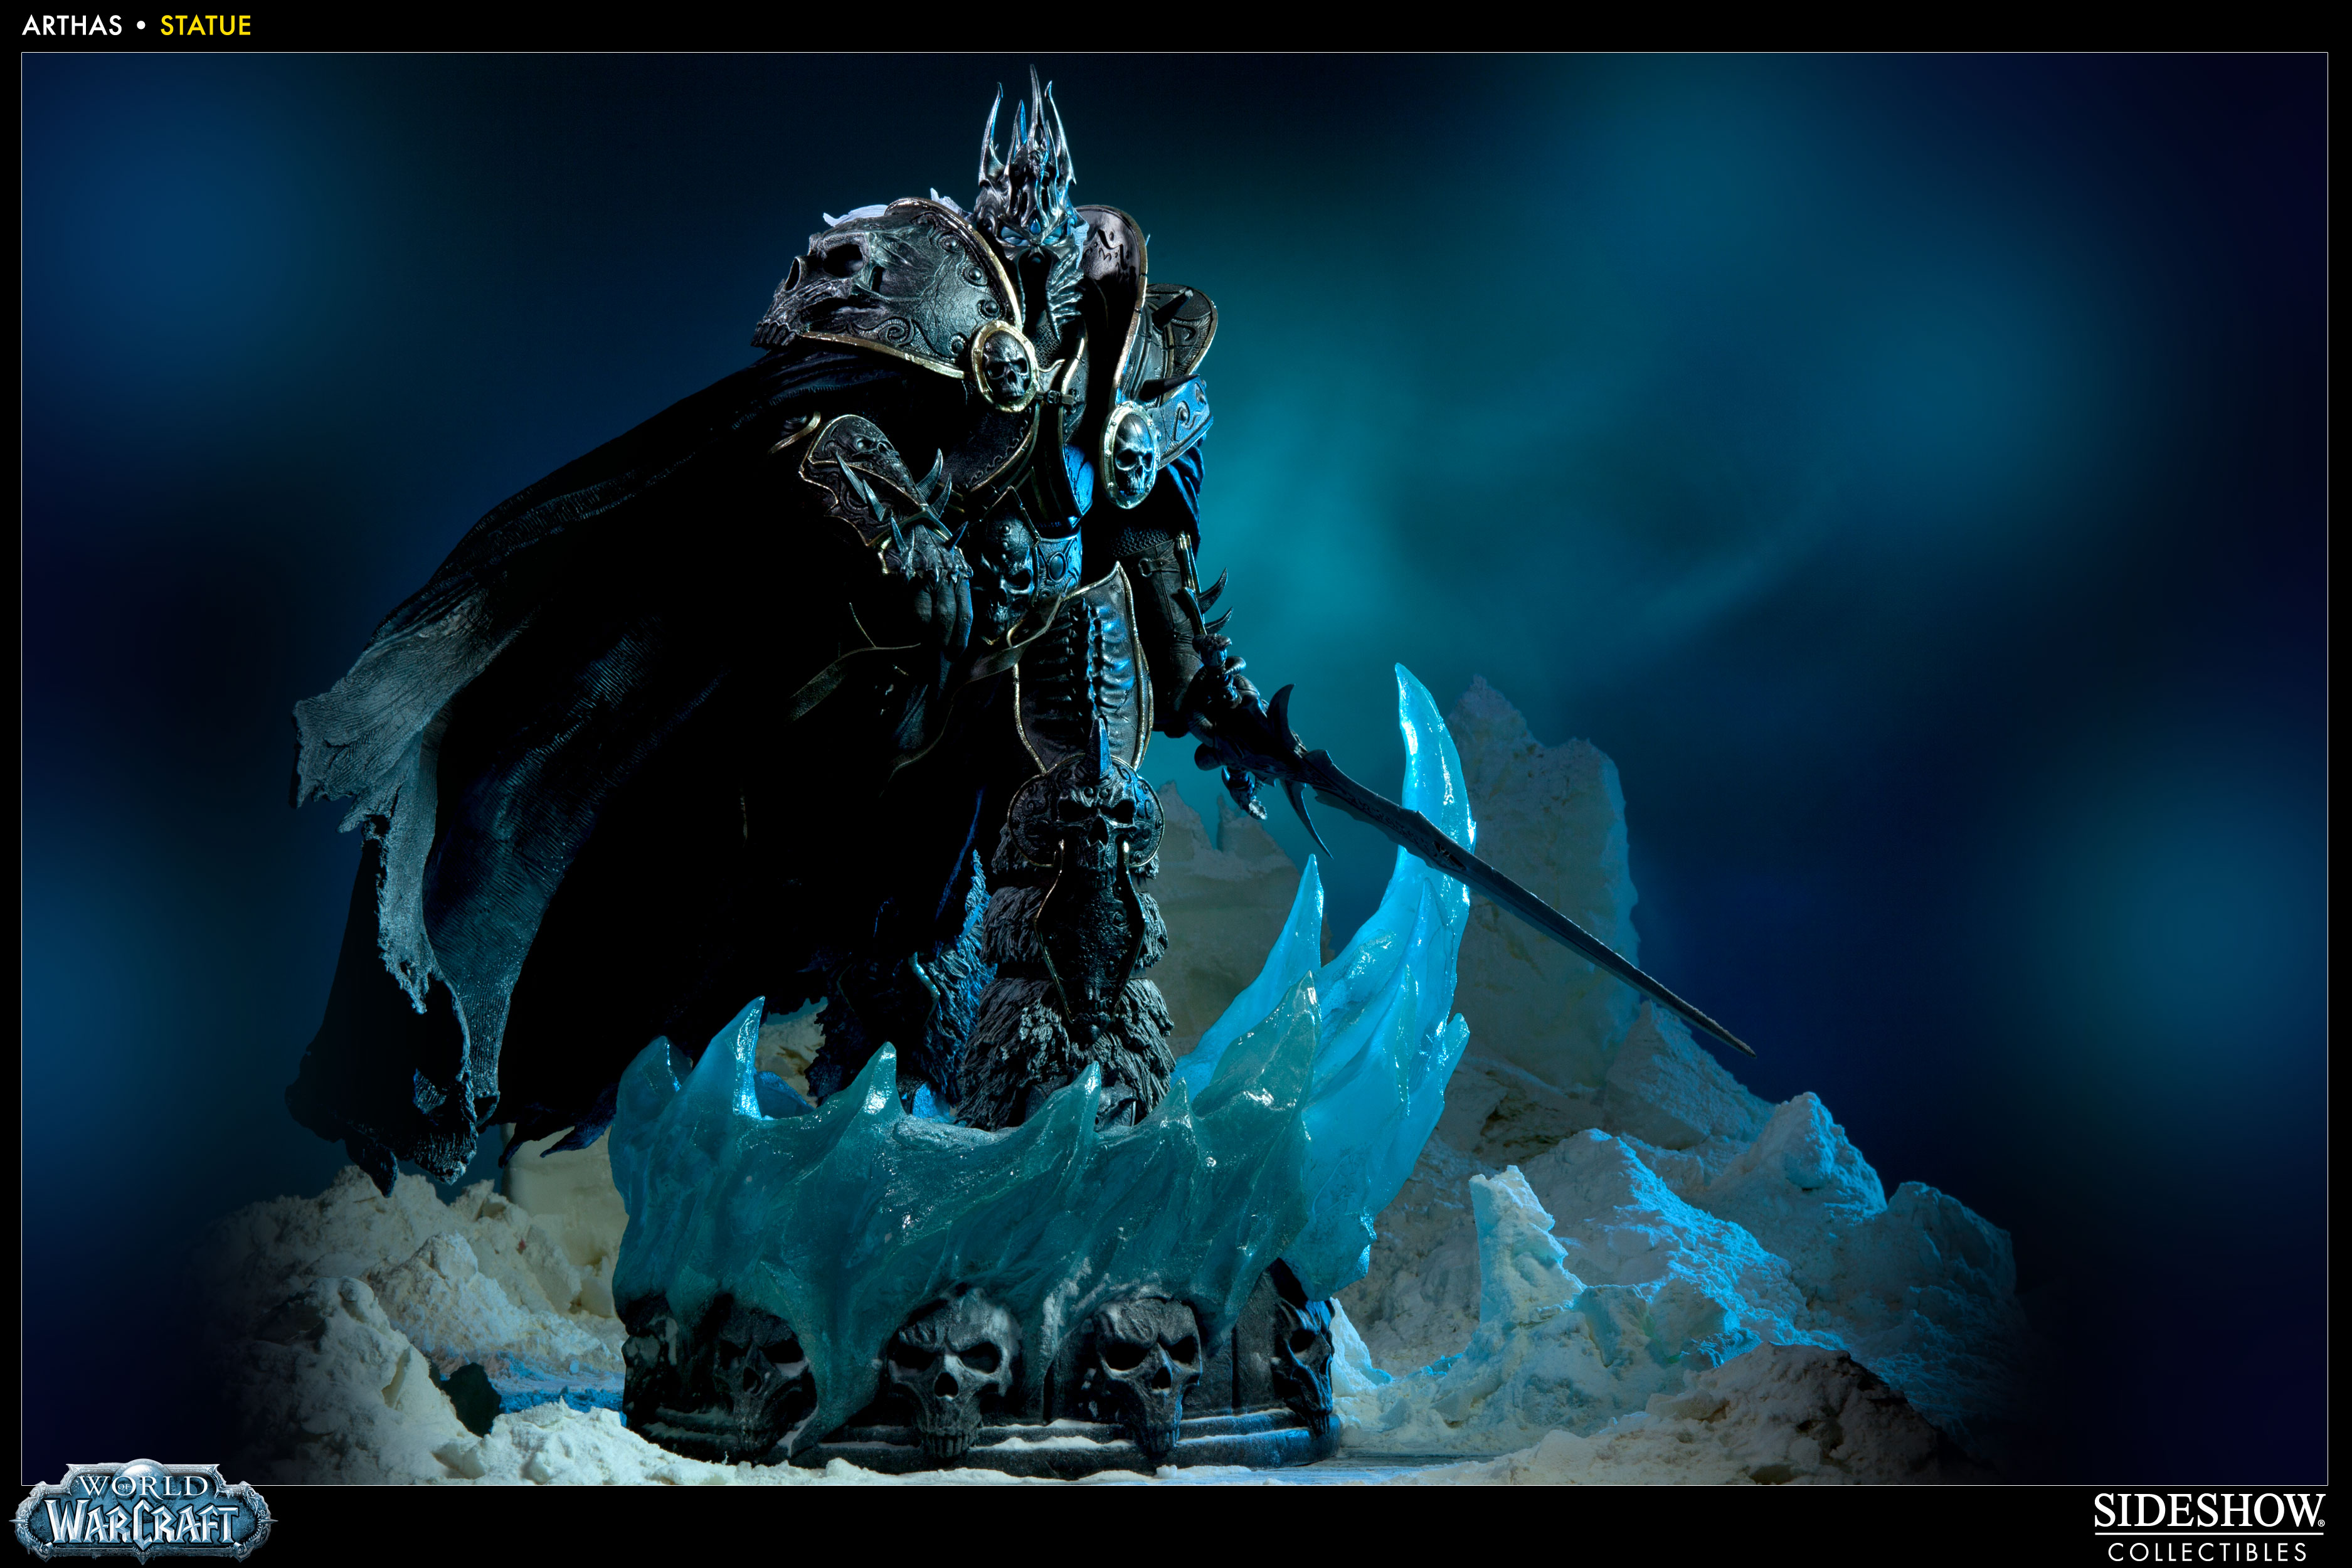 Reserve Your World of Warcraft Arthas Polystone Statue